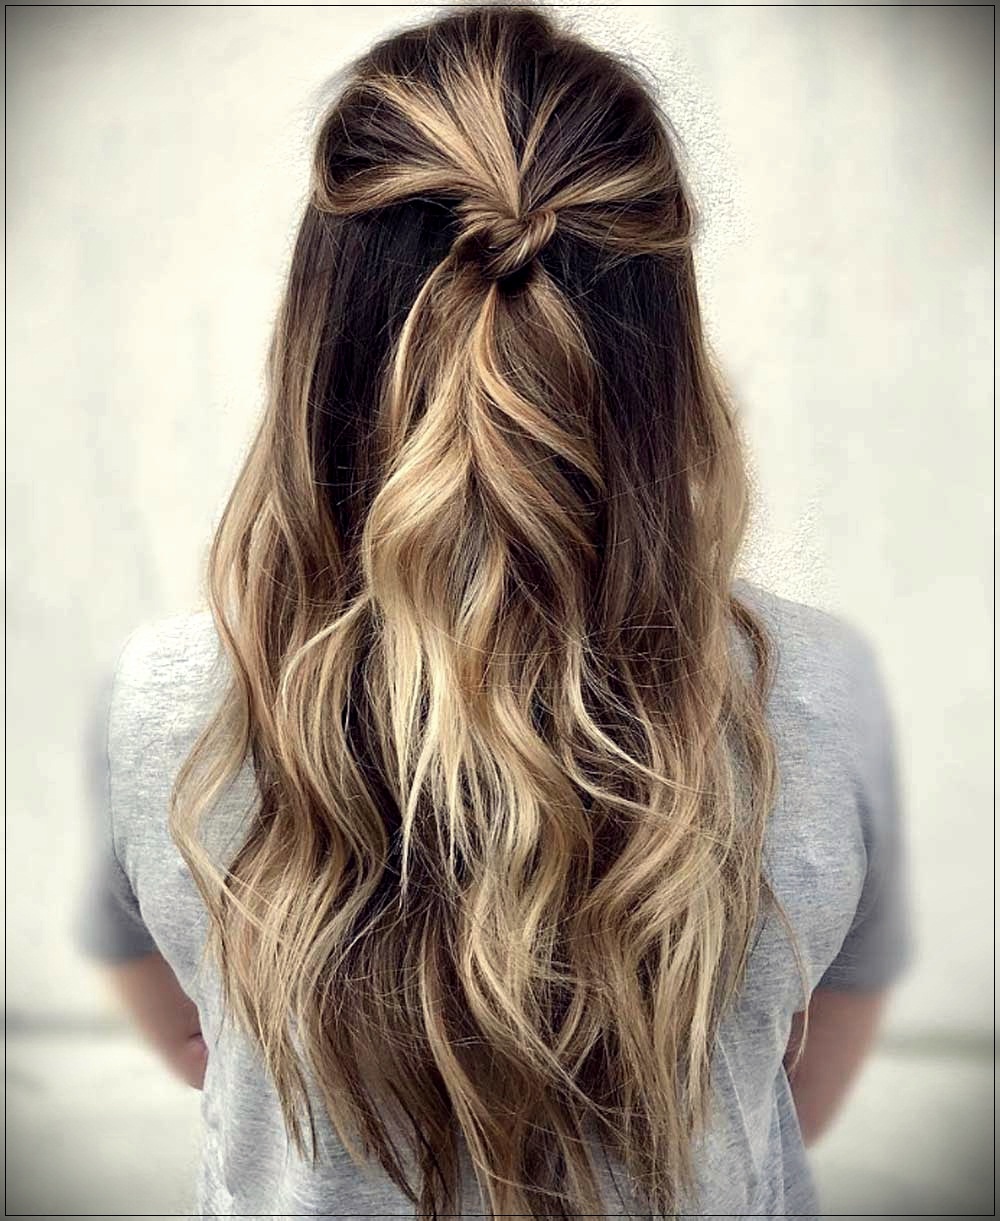 some-simple-hairstyles-for-long-hair-21_11 Some simple hairstyles for long hair